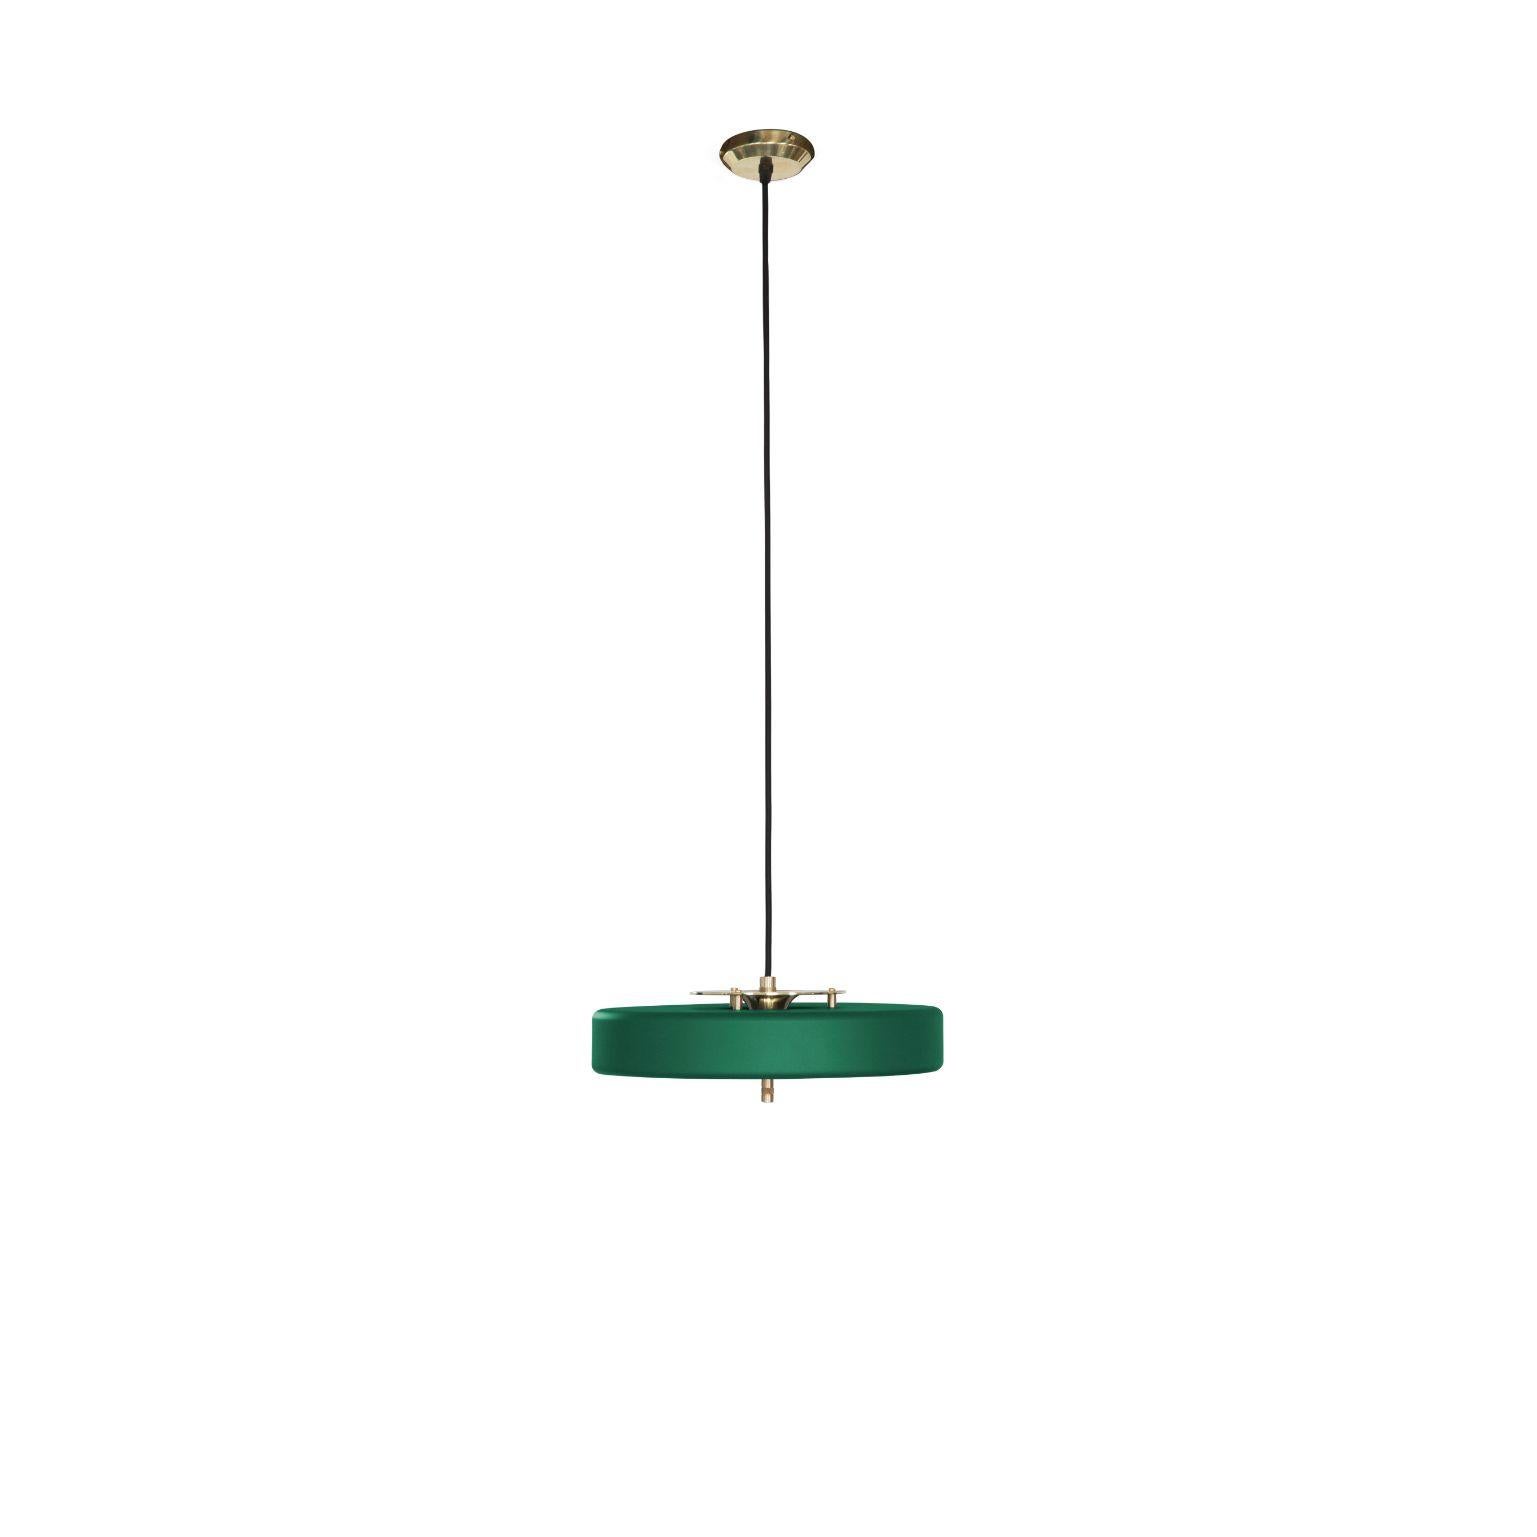 Revolve pendant light - brushed brass - green by Bert Frank
Dimensions: 60-200 x 35 x 11 cm
Materials: Brass, steel

Also available in polished brass

When Adam Yeats and Robbie Llewellyn founded Bert Frank in 2013 it was a meeting of minds and the